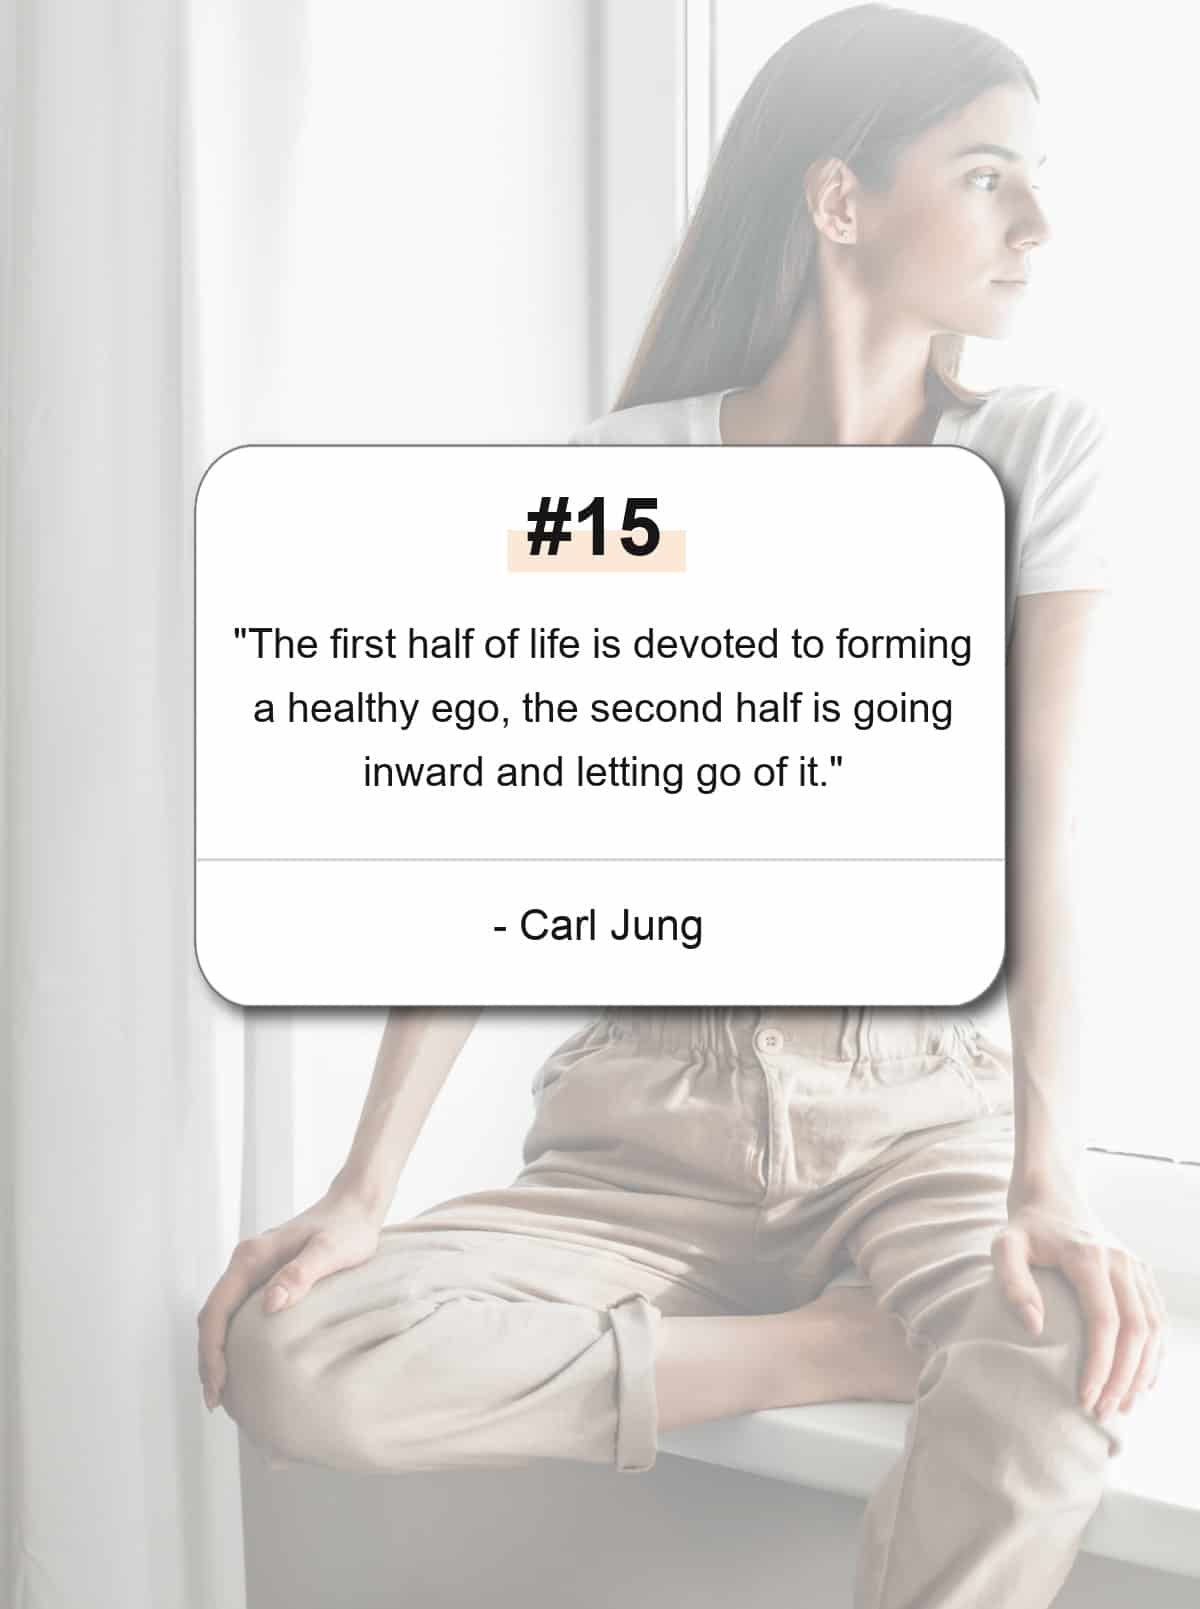 An inspiring quote about letting it go from Carl Jung